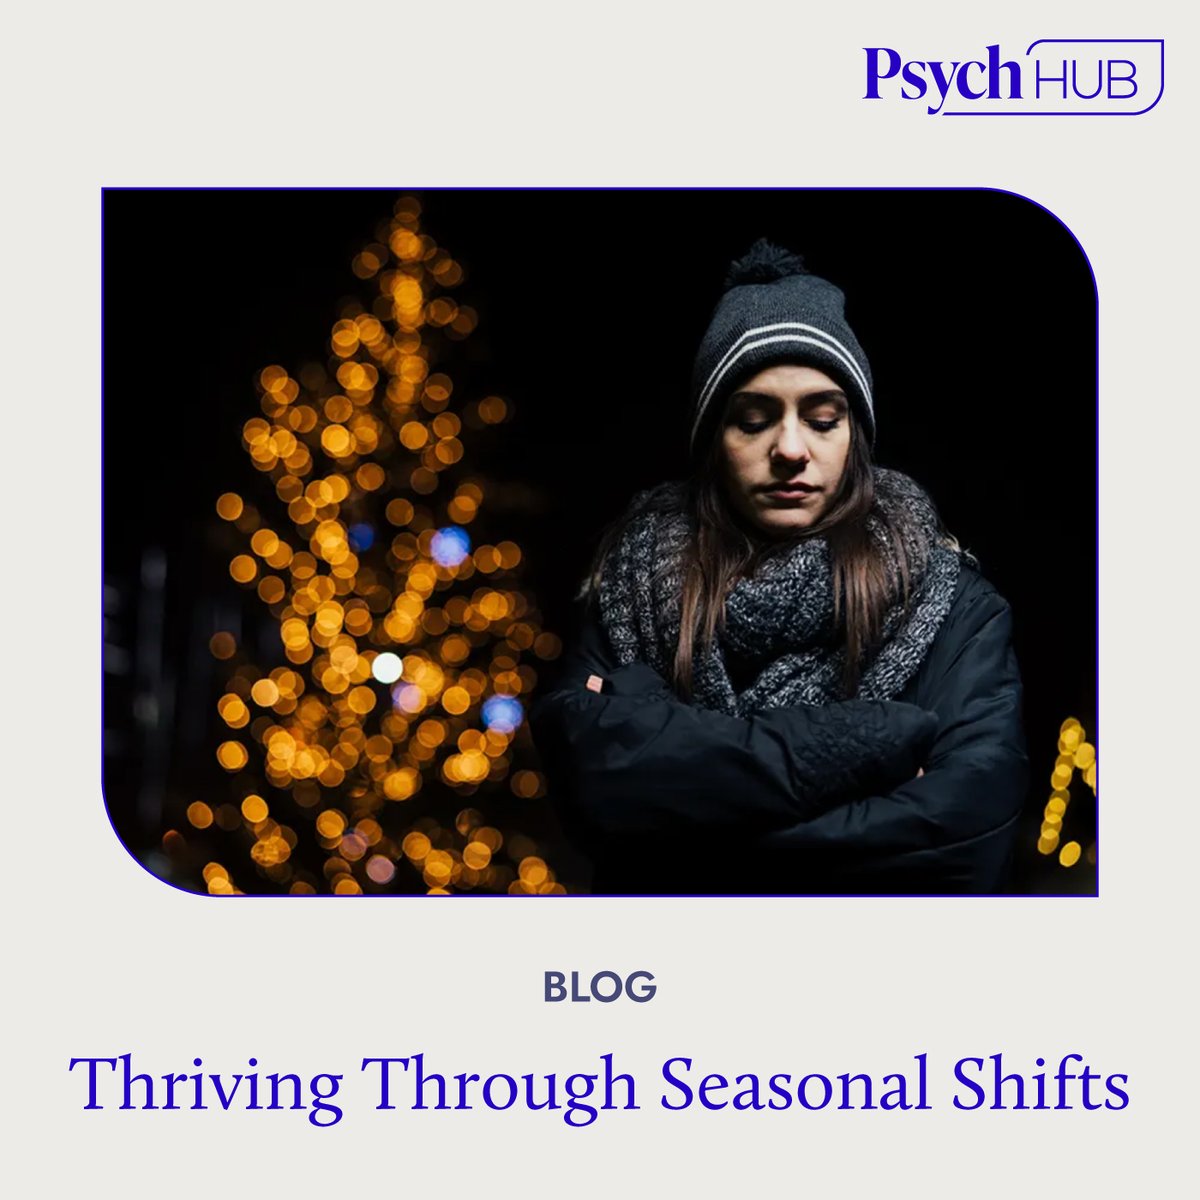 Seasonal changes can often leave us feeling drained and sometimes powerless. Our blog 'Thriving Through Seasonal Shifts' shares tips on how to deal with Seasonal Affective Disorder and manage the winter blues. hubs.li/Q02hBVdk0